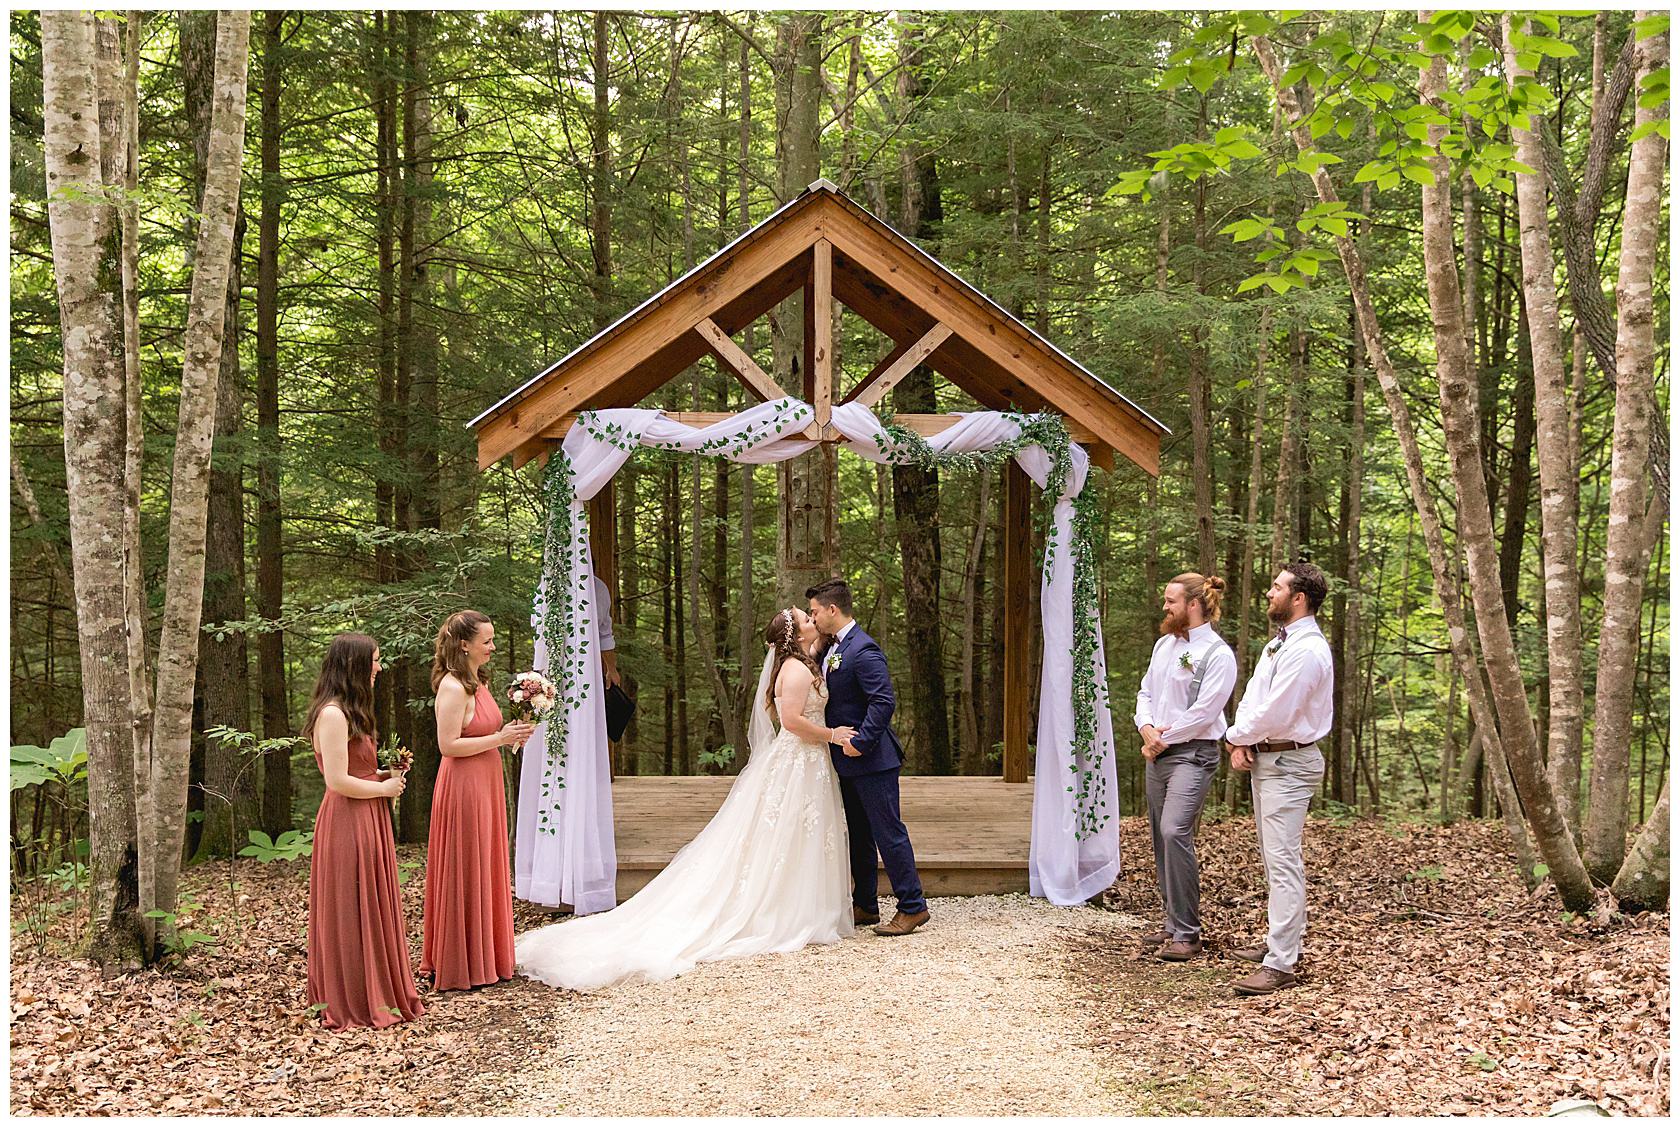 Forest Ceremony Wedding Elopement at Hemlock Springs in the Red River Gorge